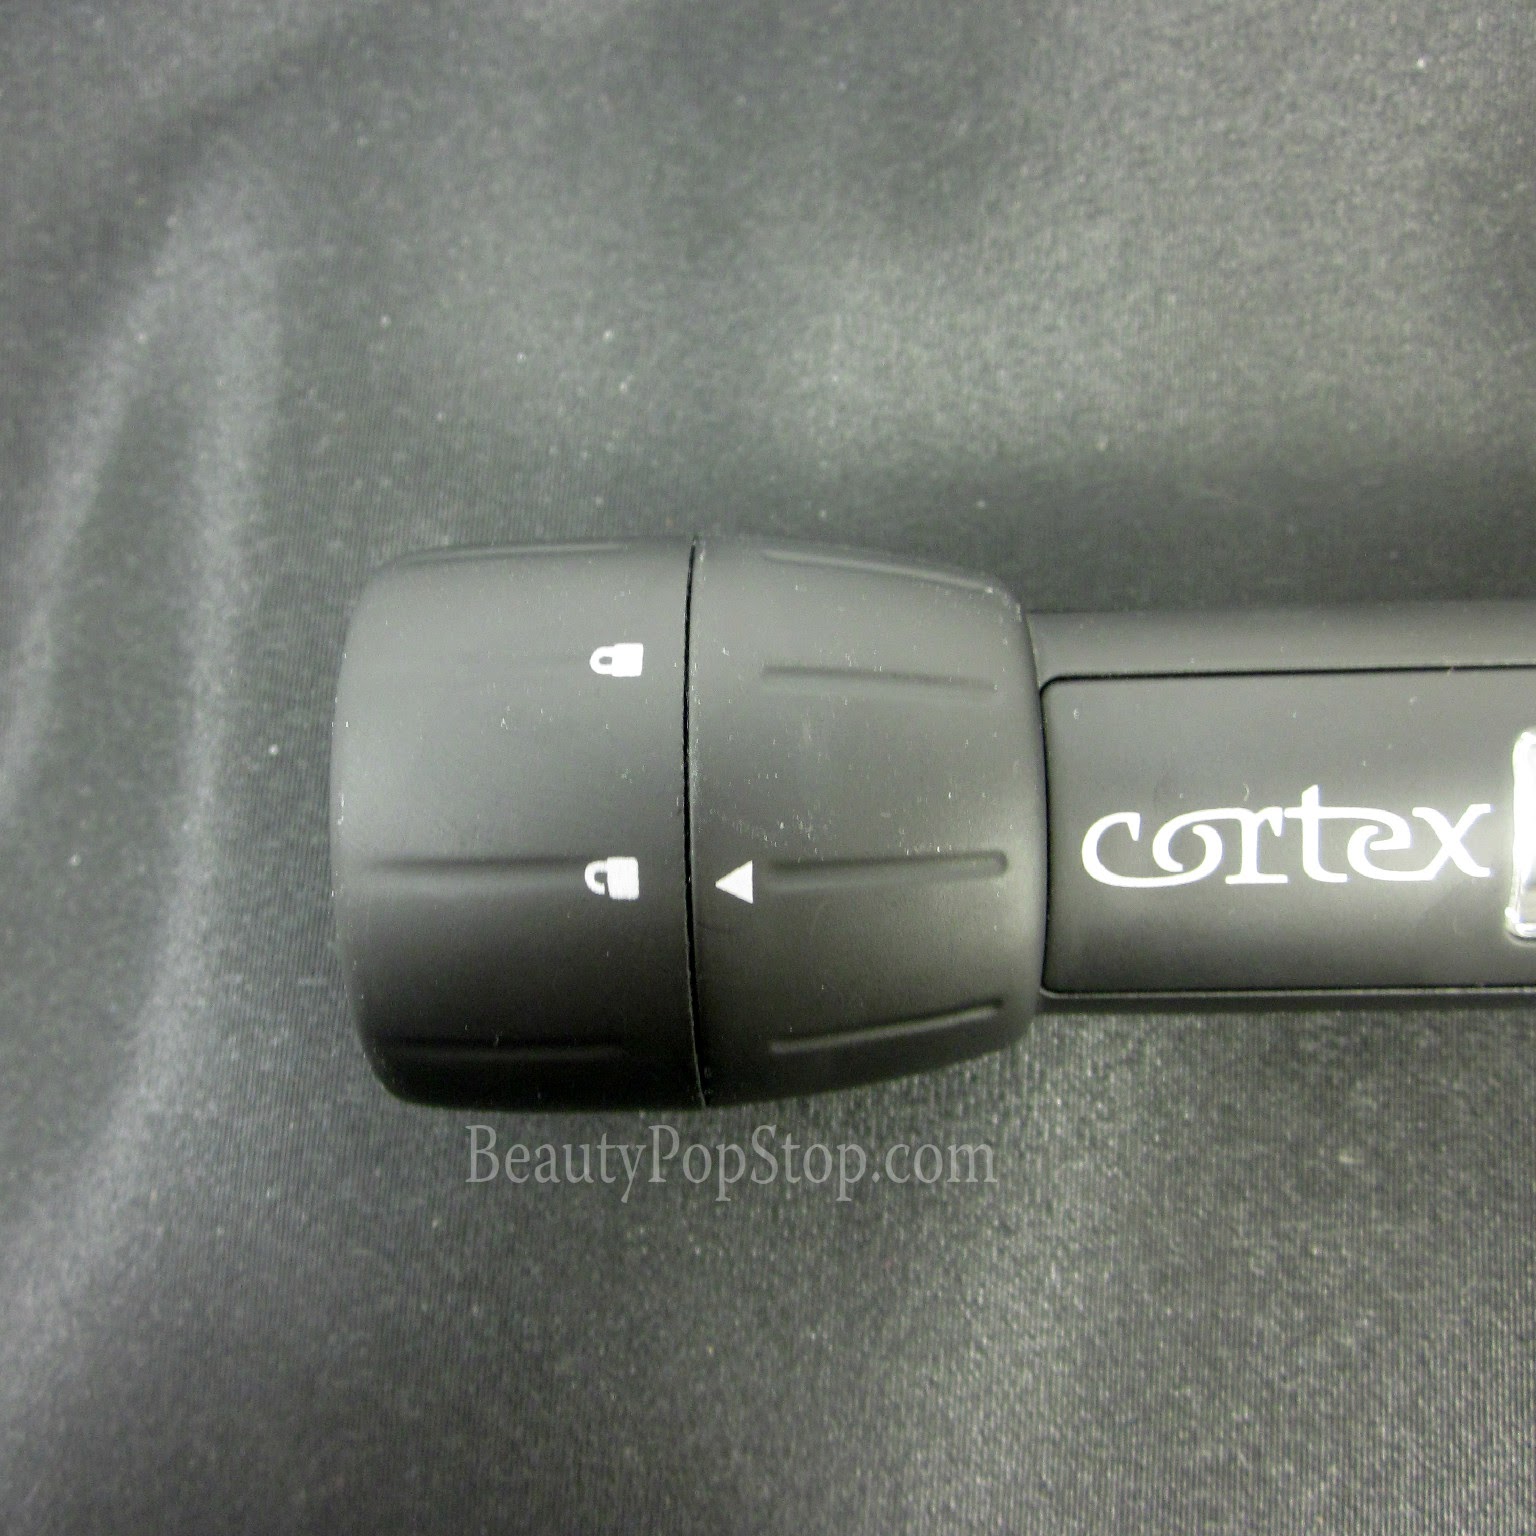 flatironexperts.com cortex 4 n one profesional digital clipless curling iron review